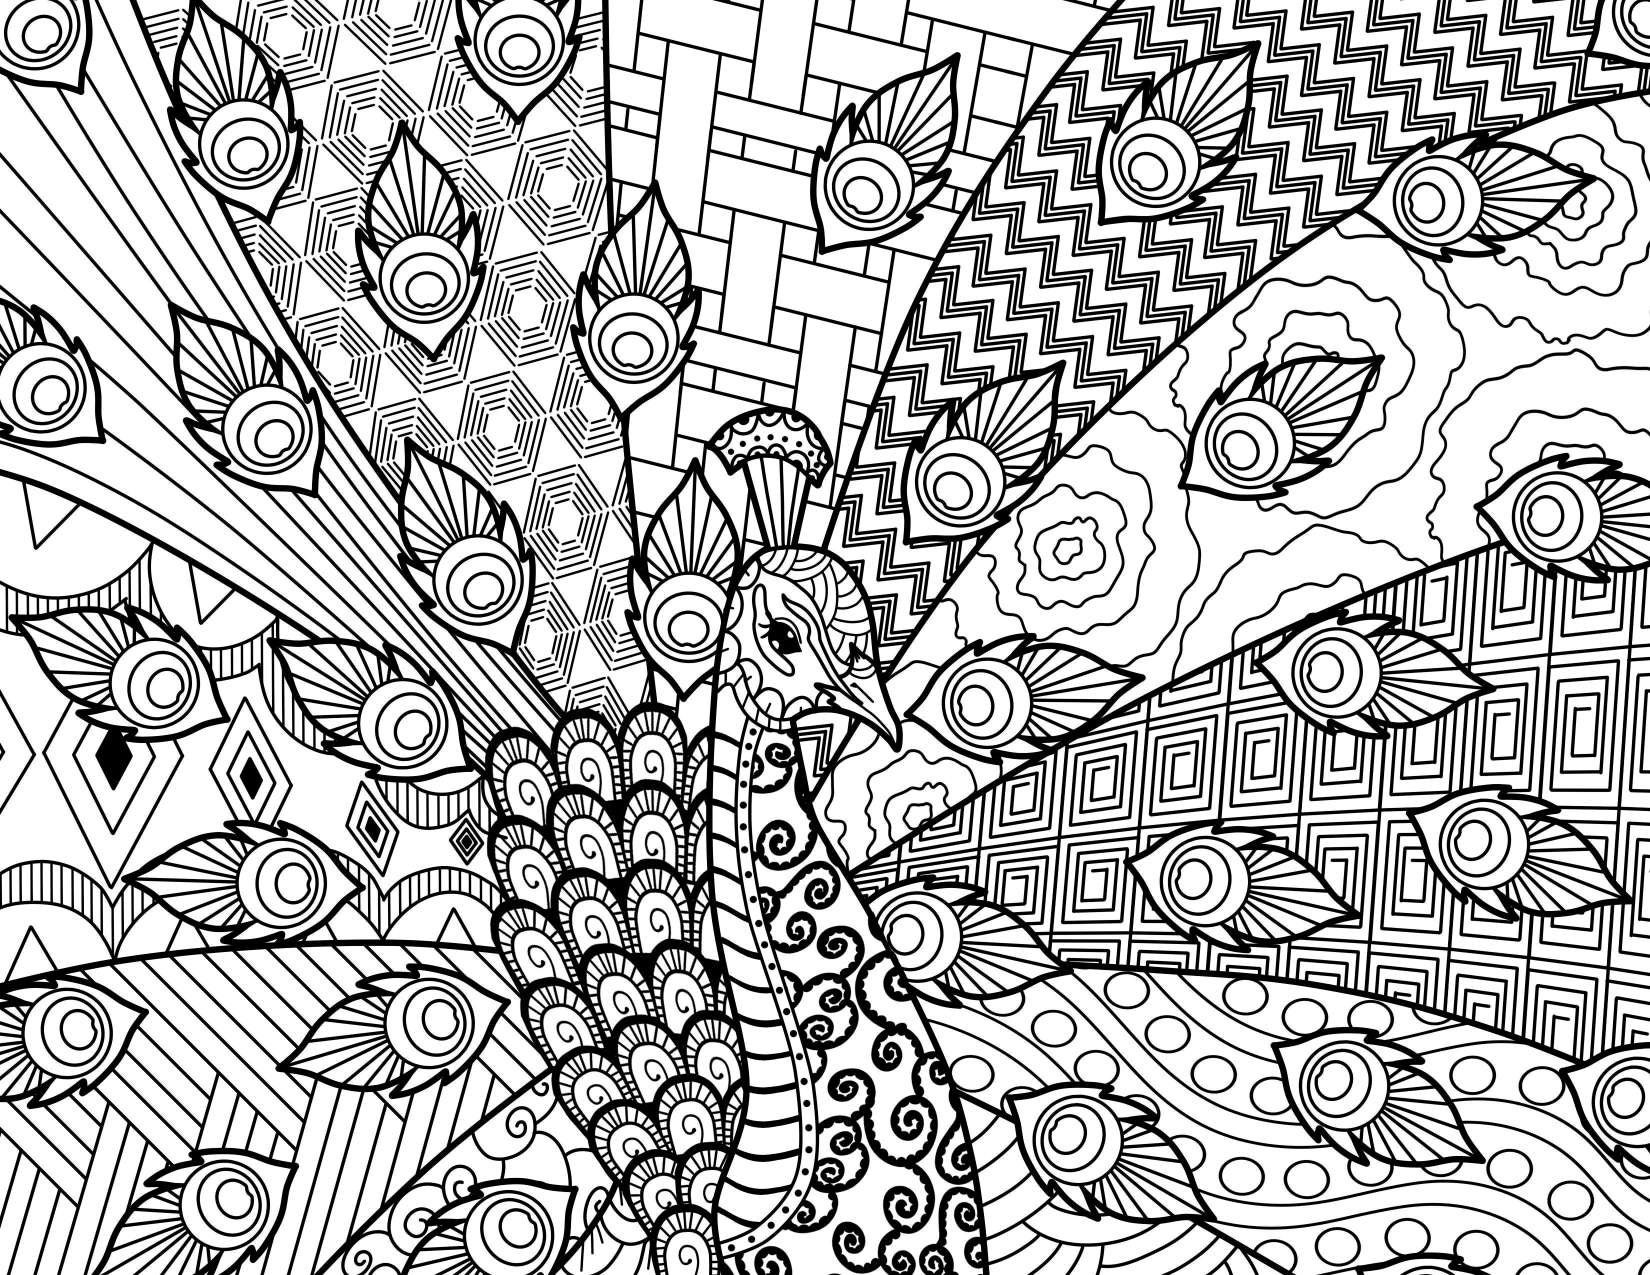 Animal Coloring Nature Coloring Page Adult Coloring Page Printable Coloring  Colouring Pages Animal Art Forest Art Coloring Set 